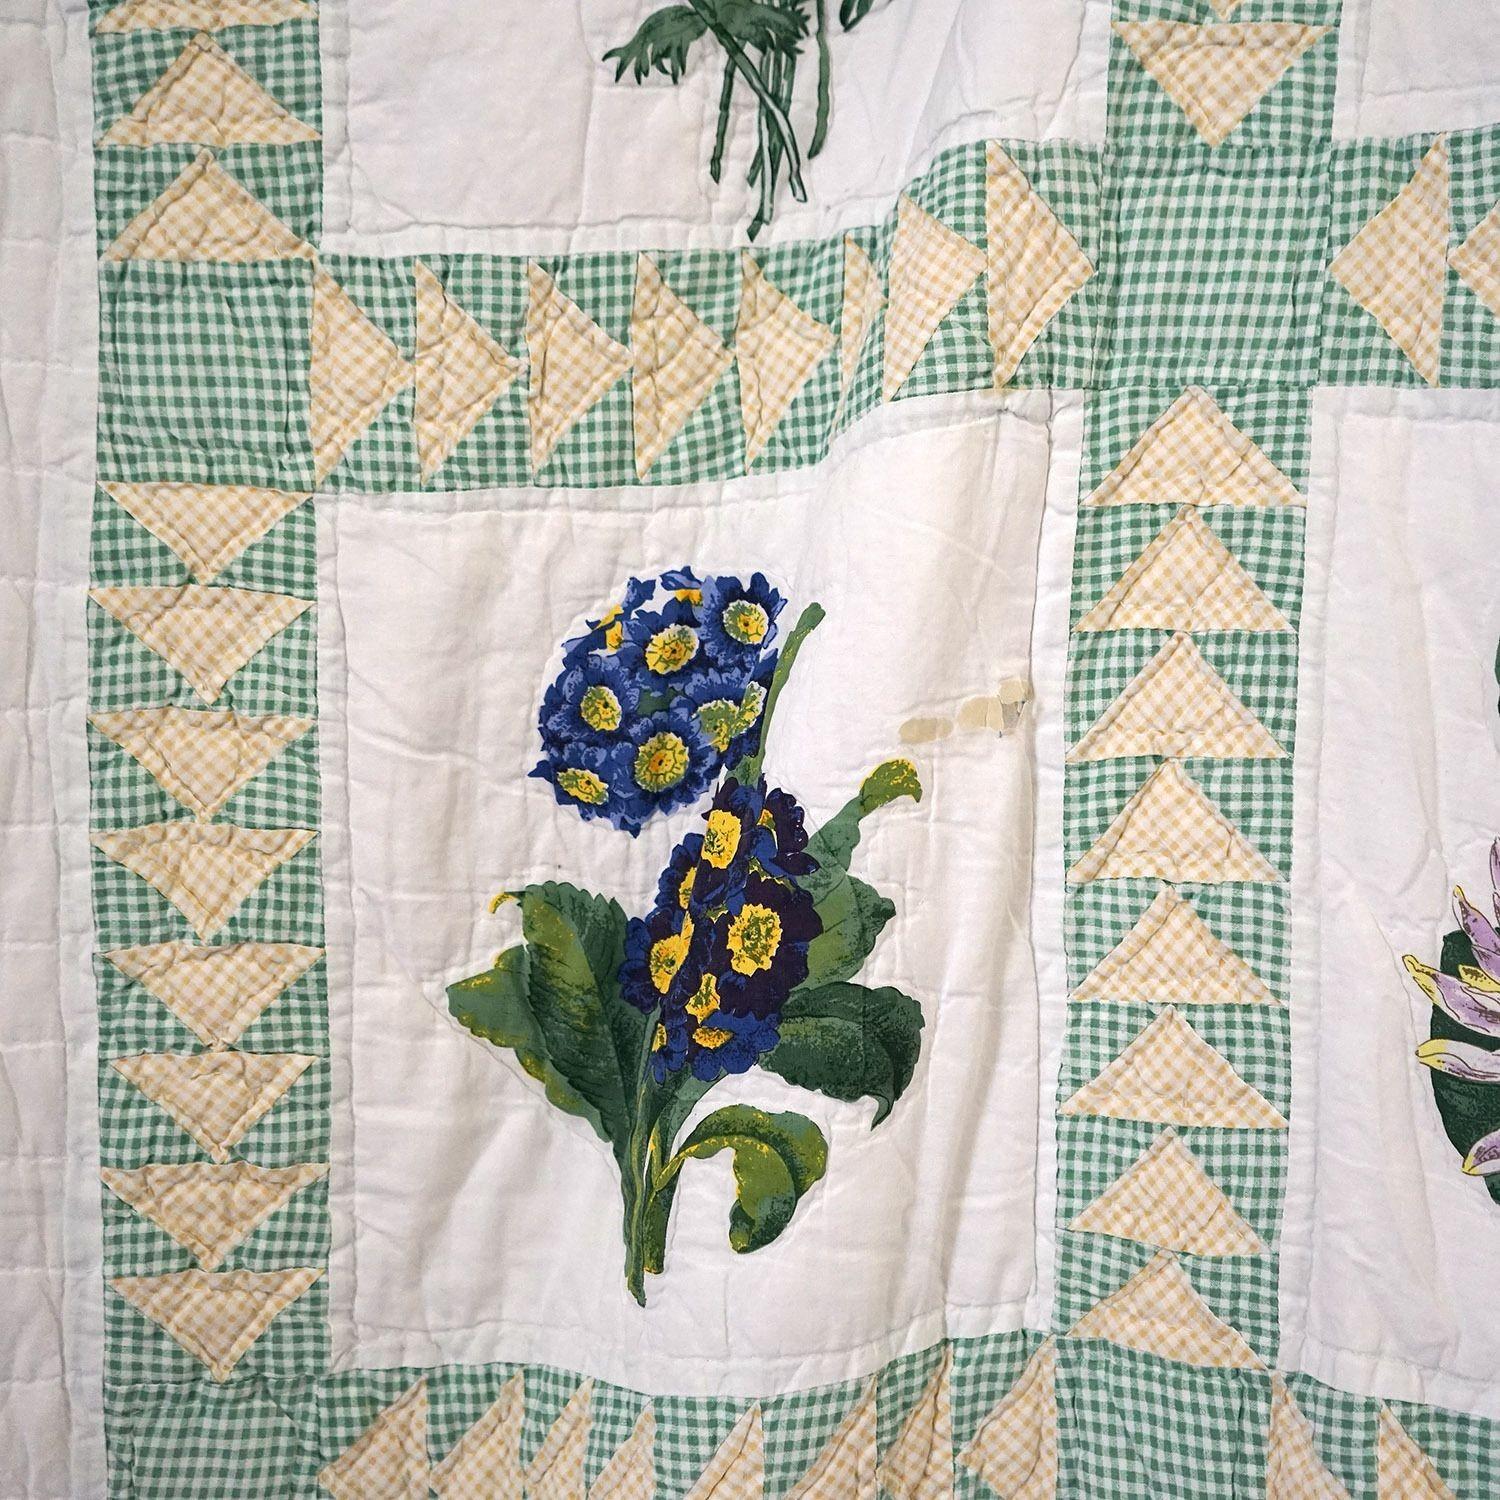 Large Vintage American Hand-Stitched Floral Patchwork Quilt, 20th Century 1